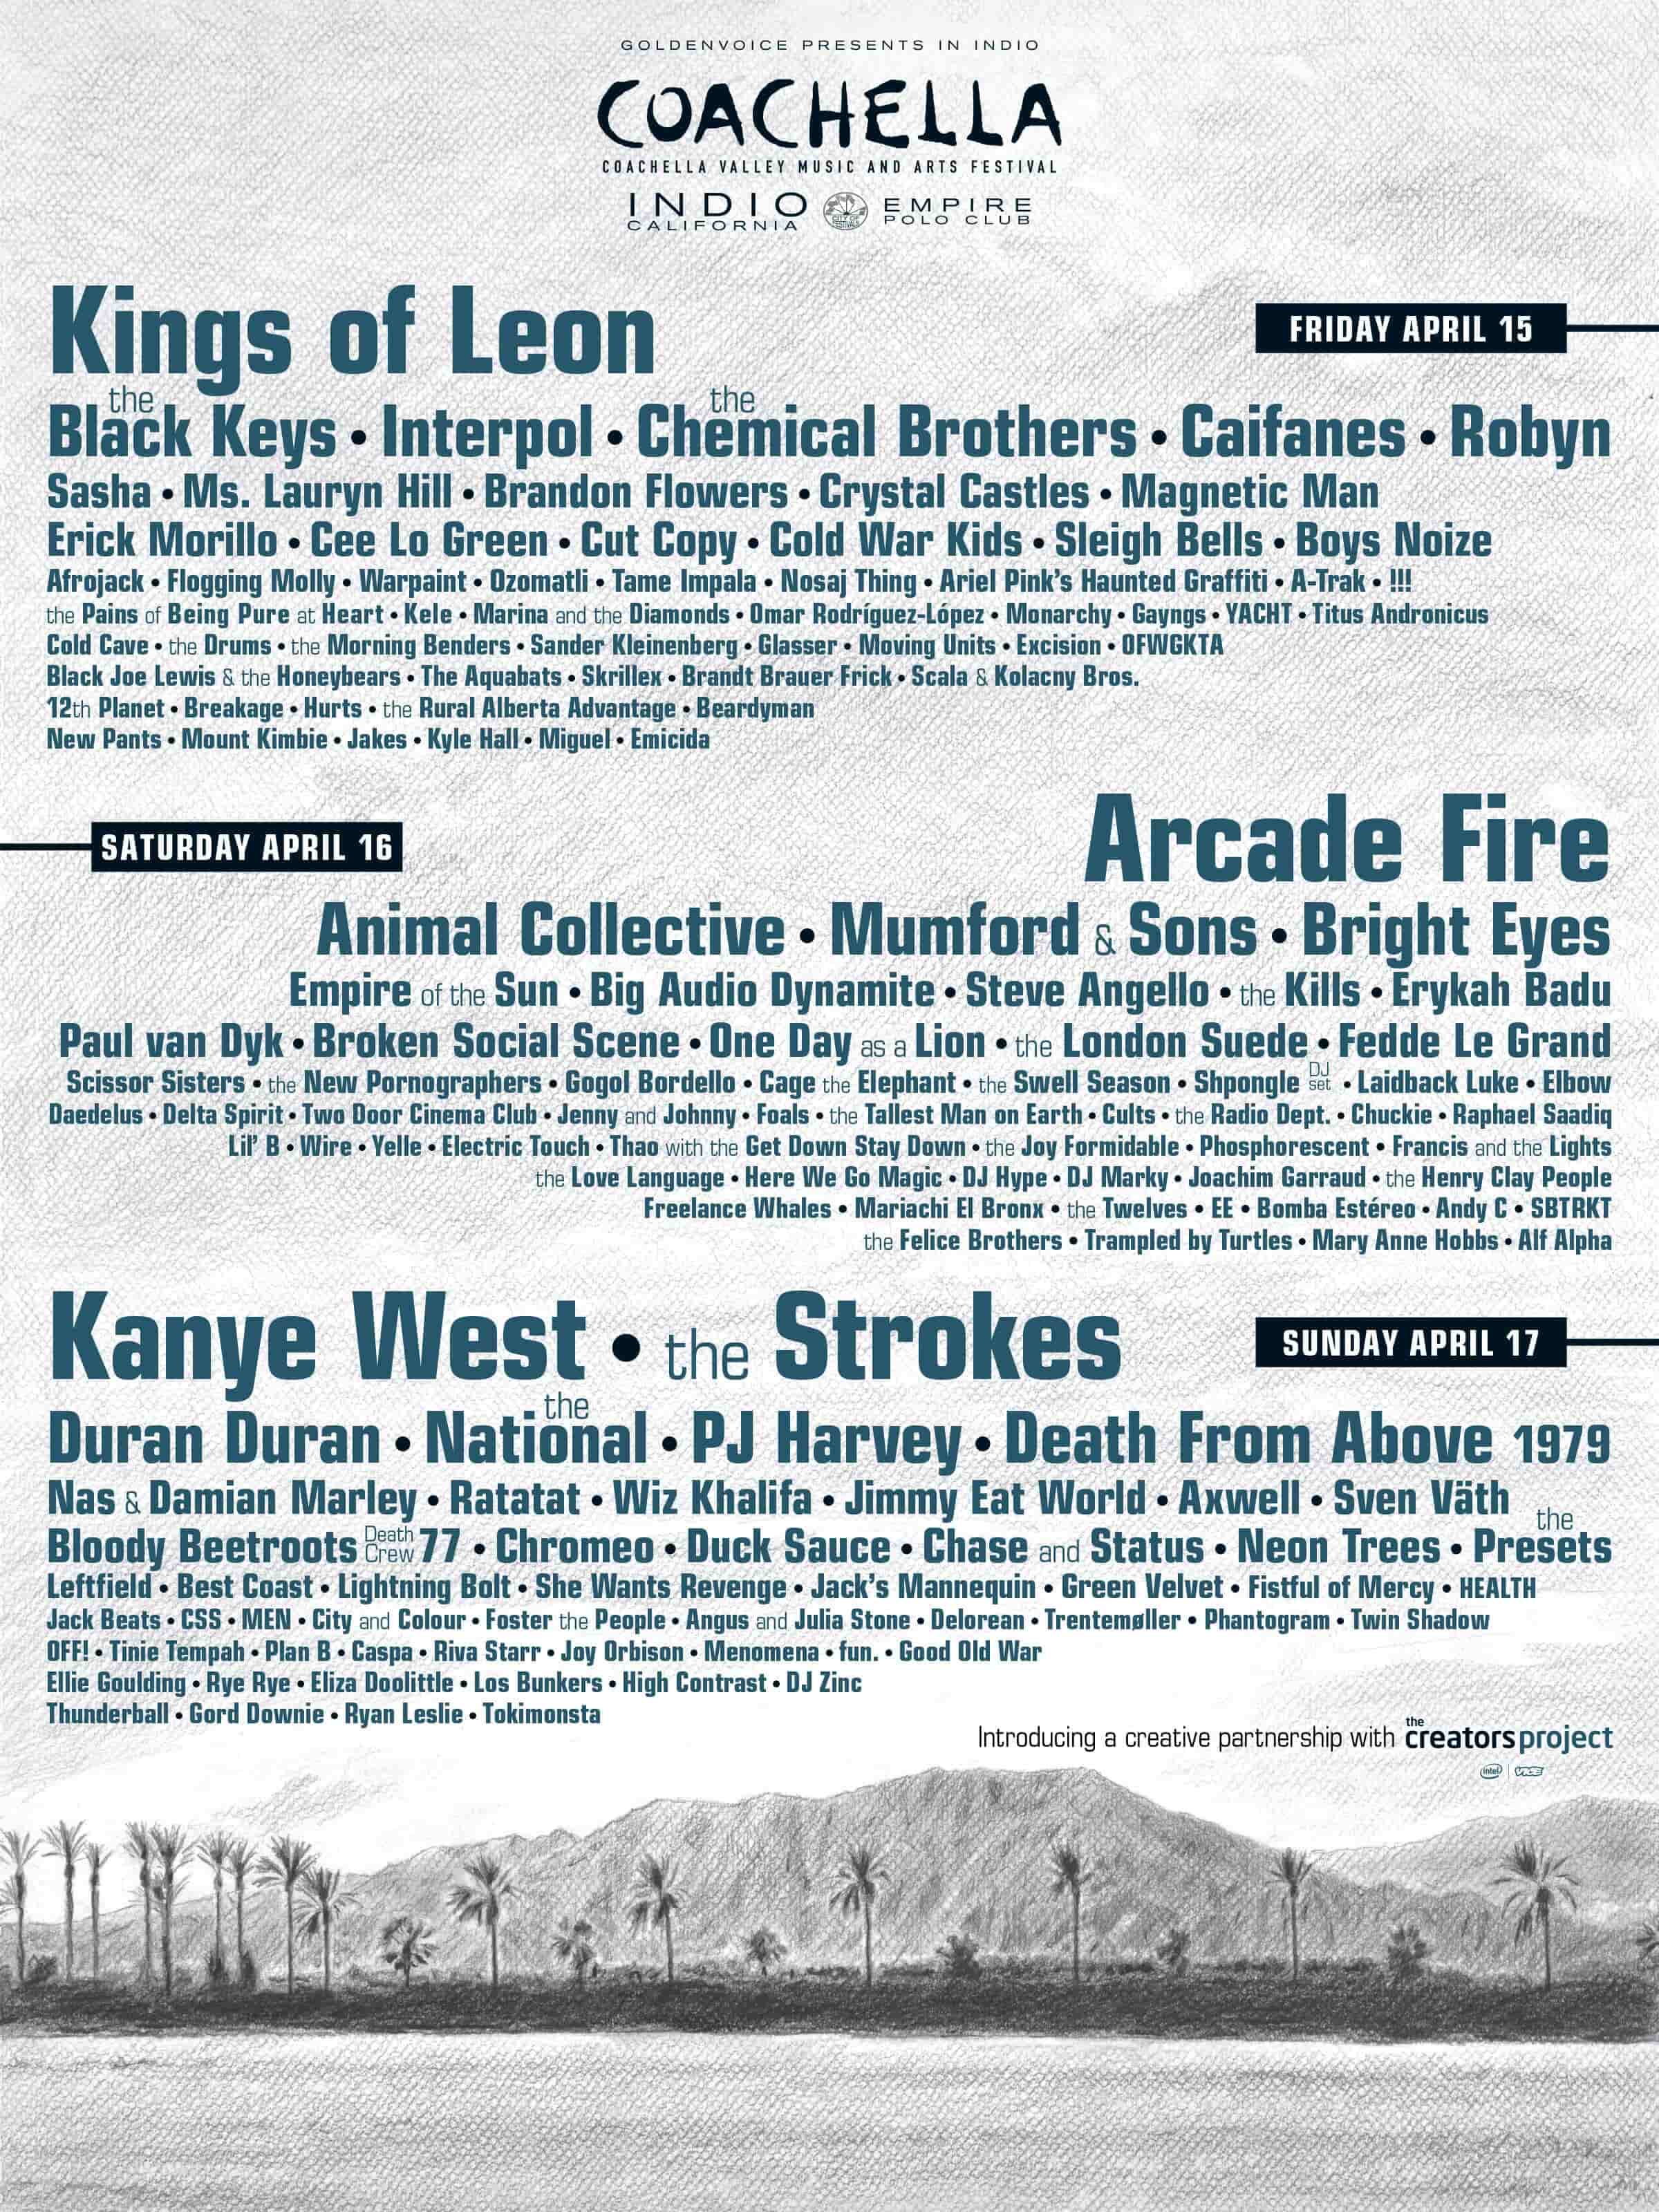 EE was part of the lineup for Coachella 2011